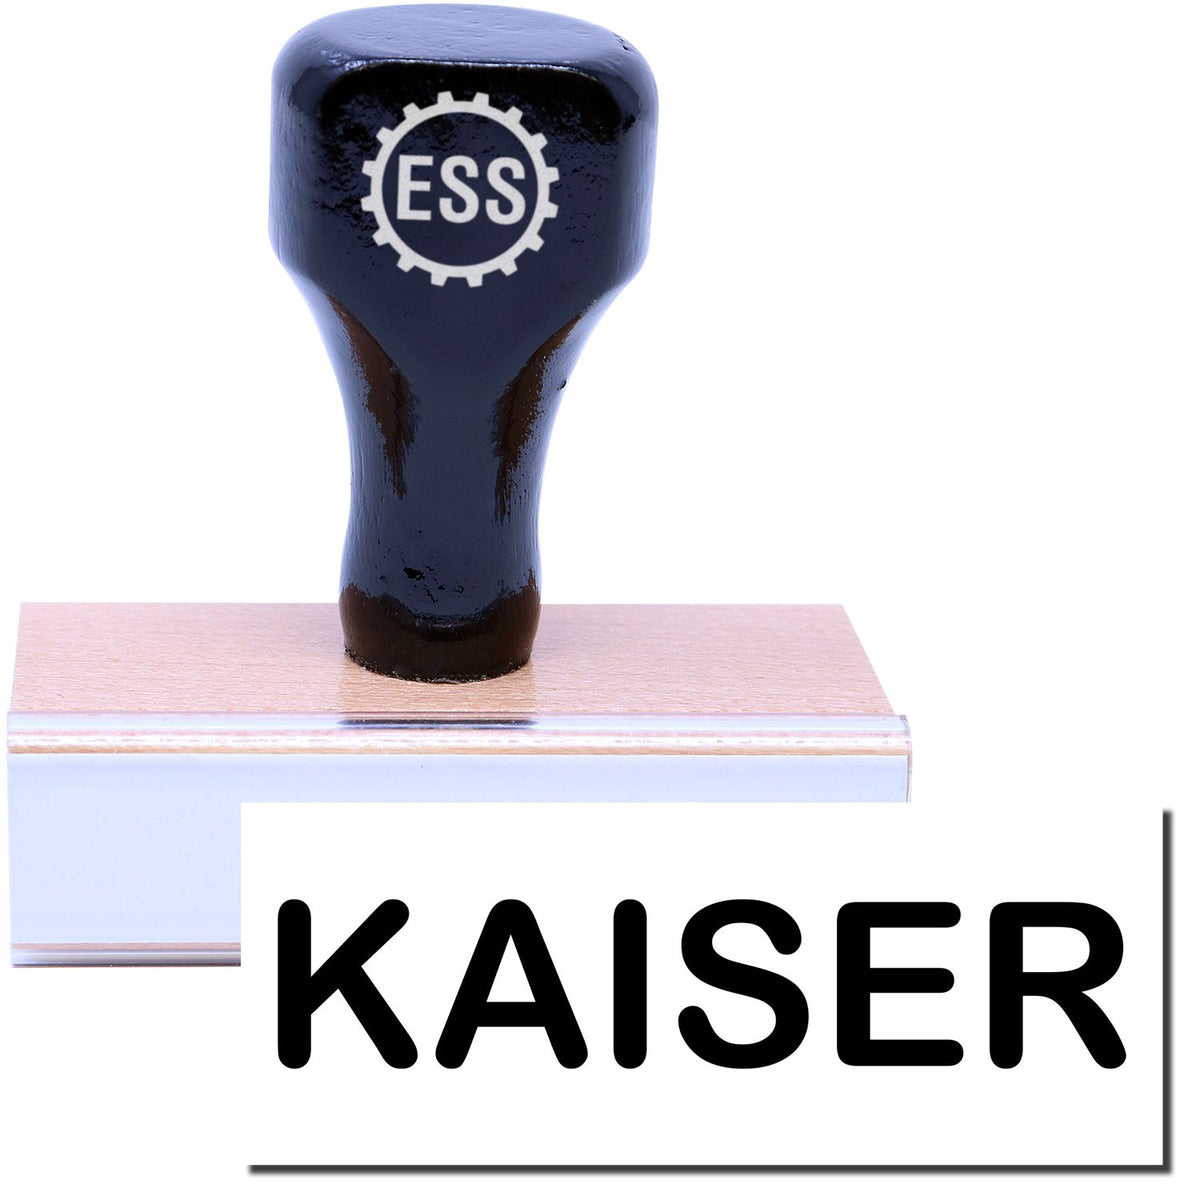 A stock office rubber stamp with a stamped image showing how the text &quot;KAISER&quot; is displayed after stamping.